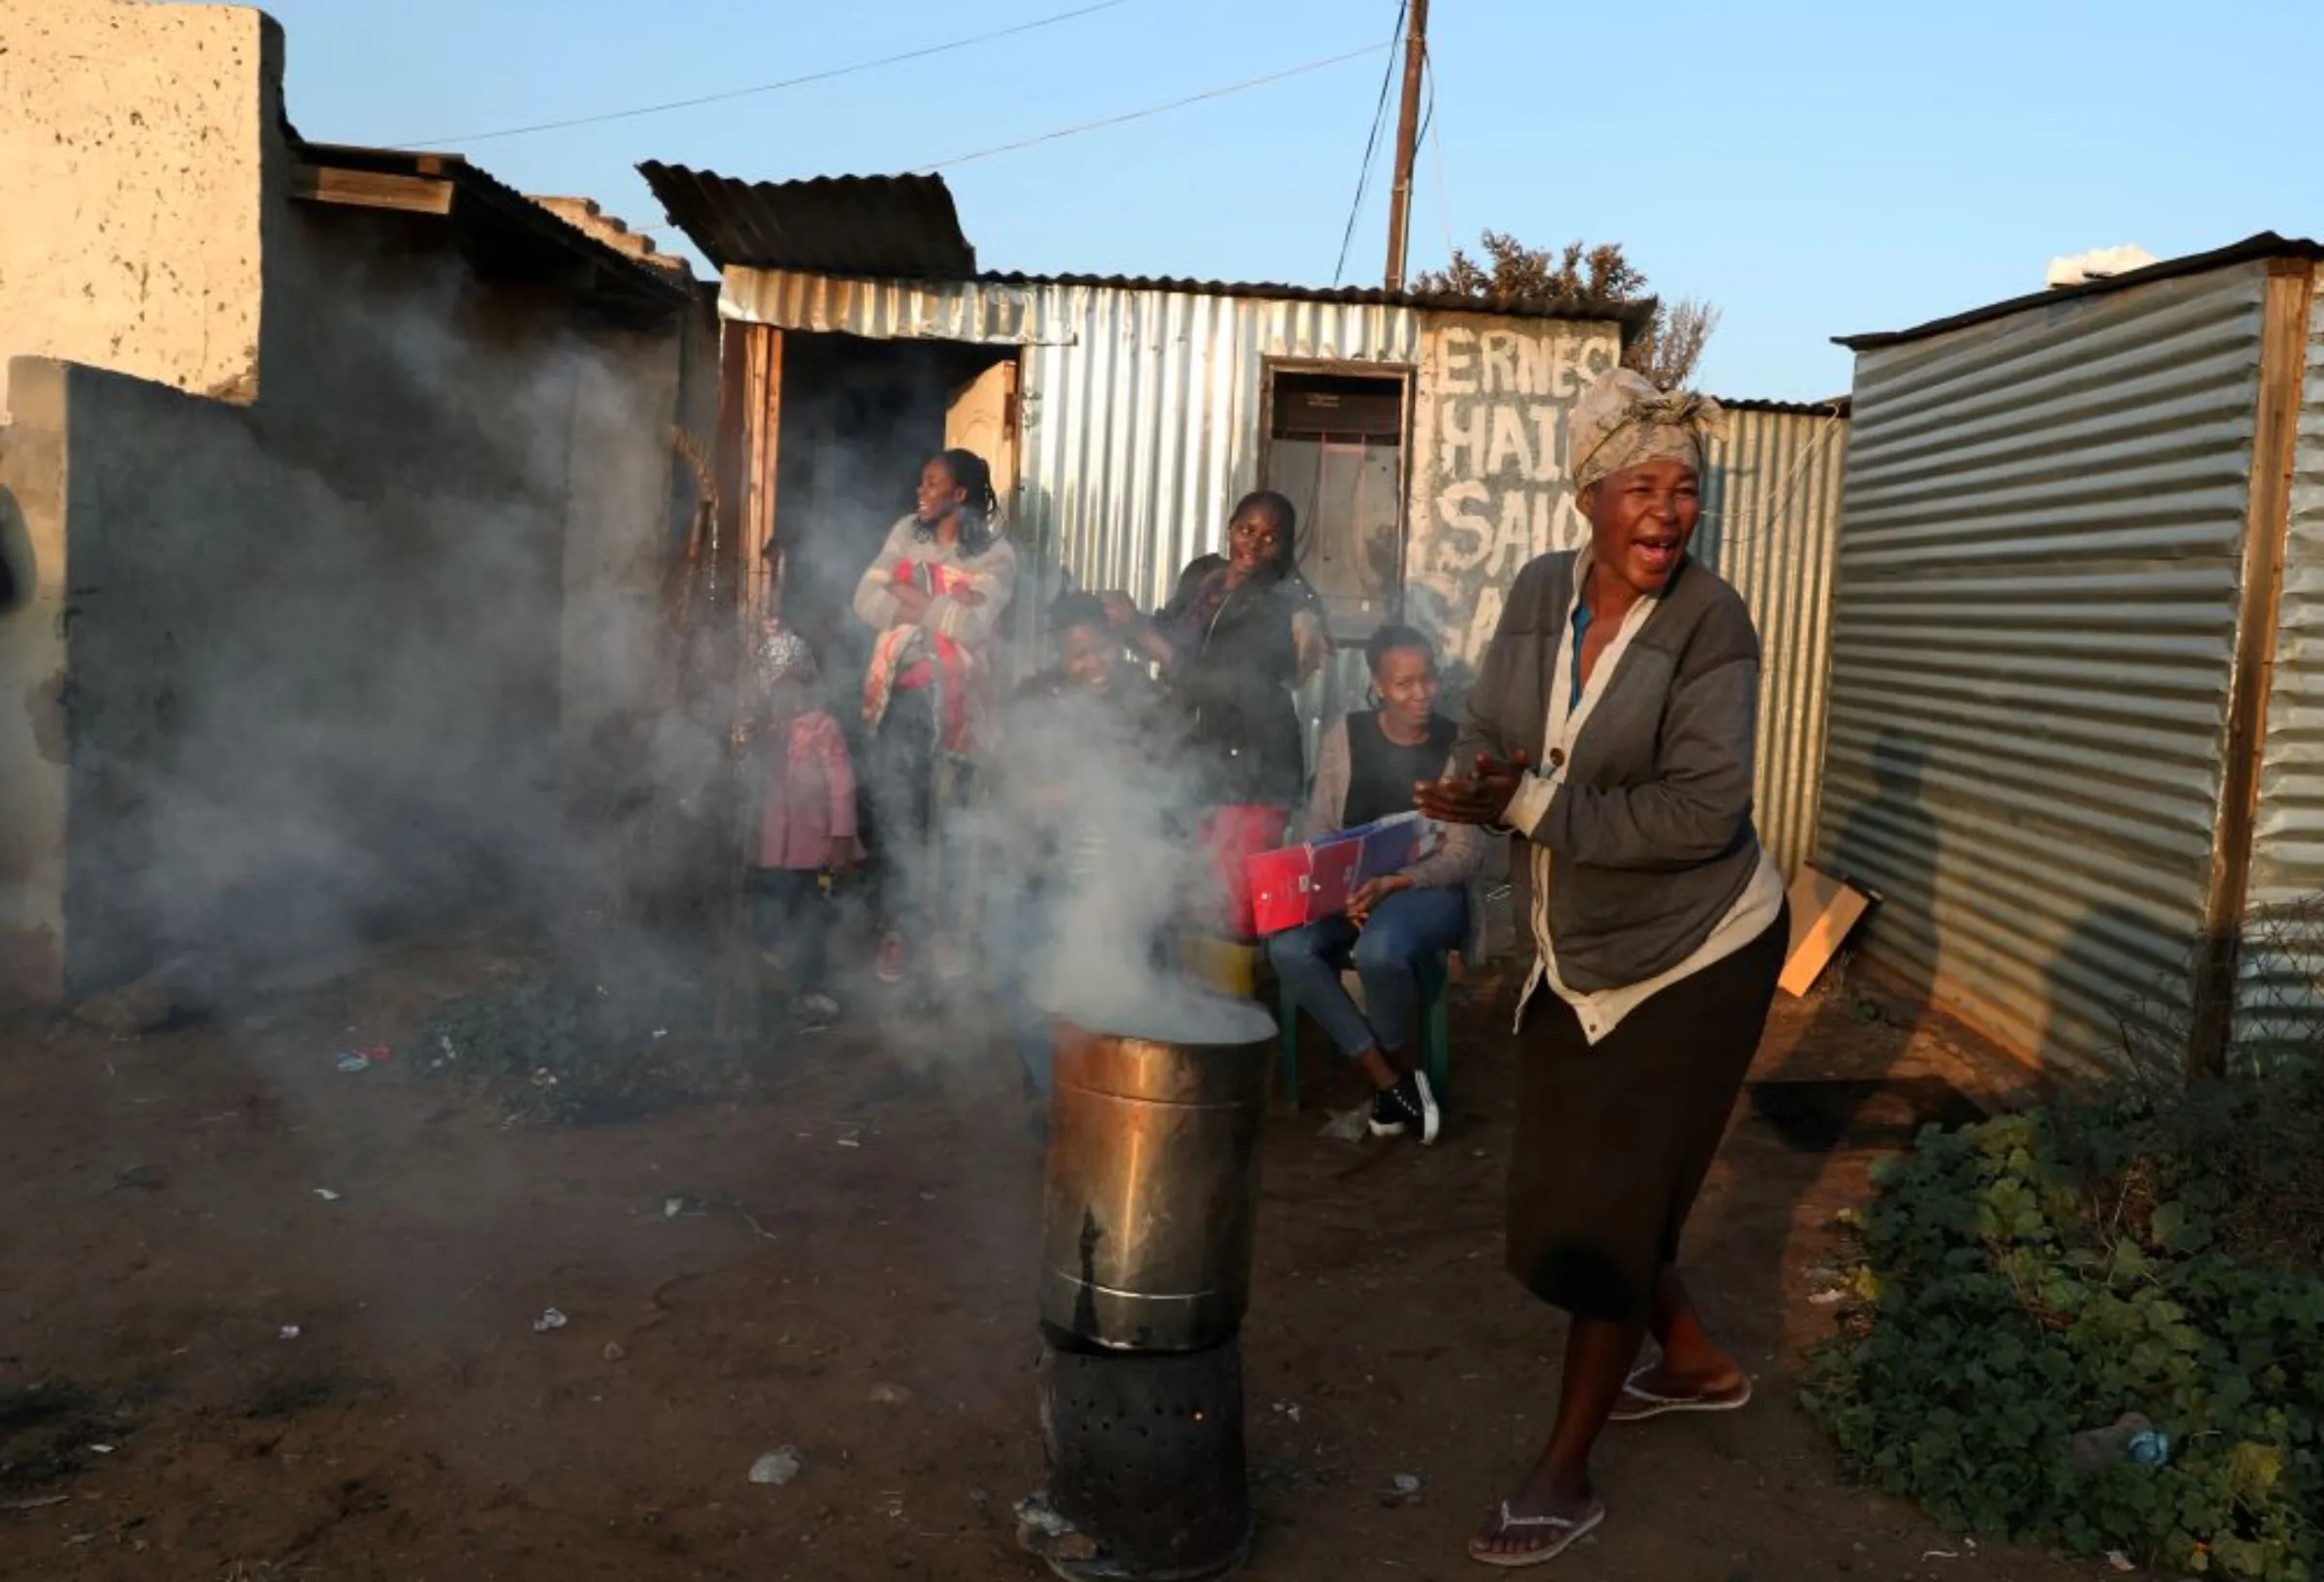 South Africa’s electricity crisis puts women at risk